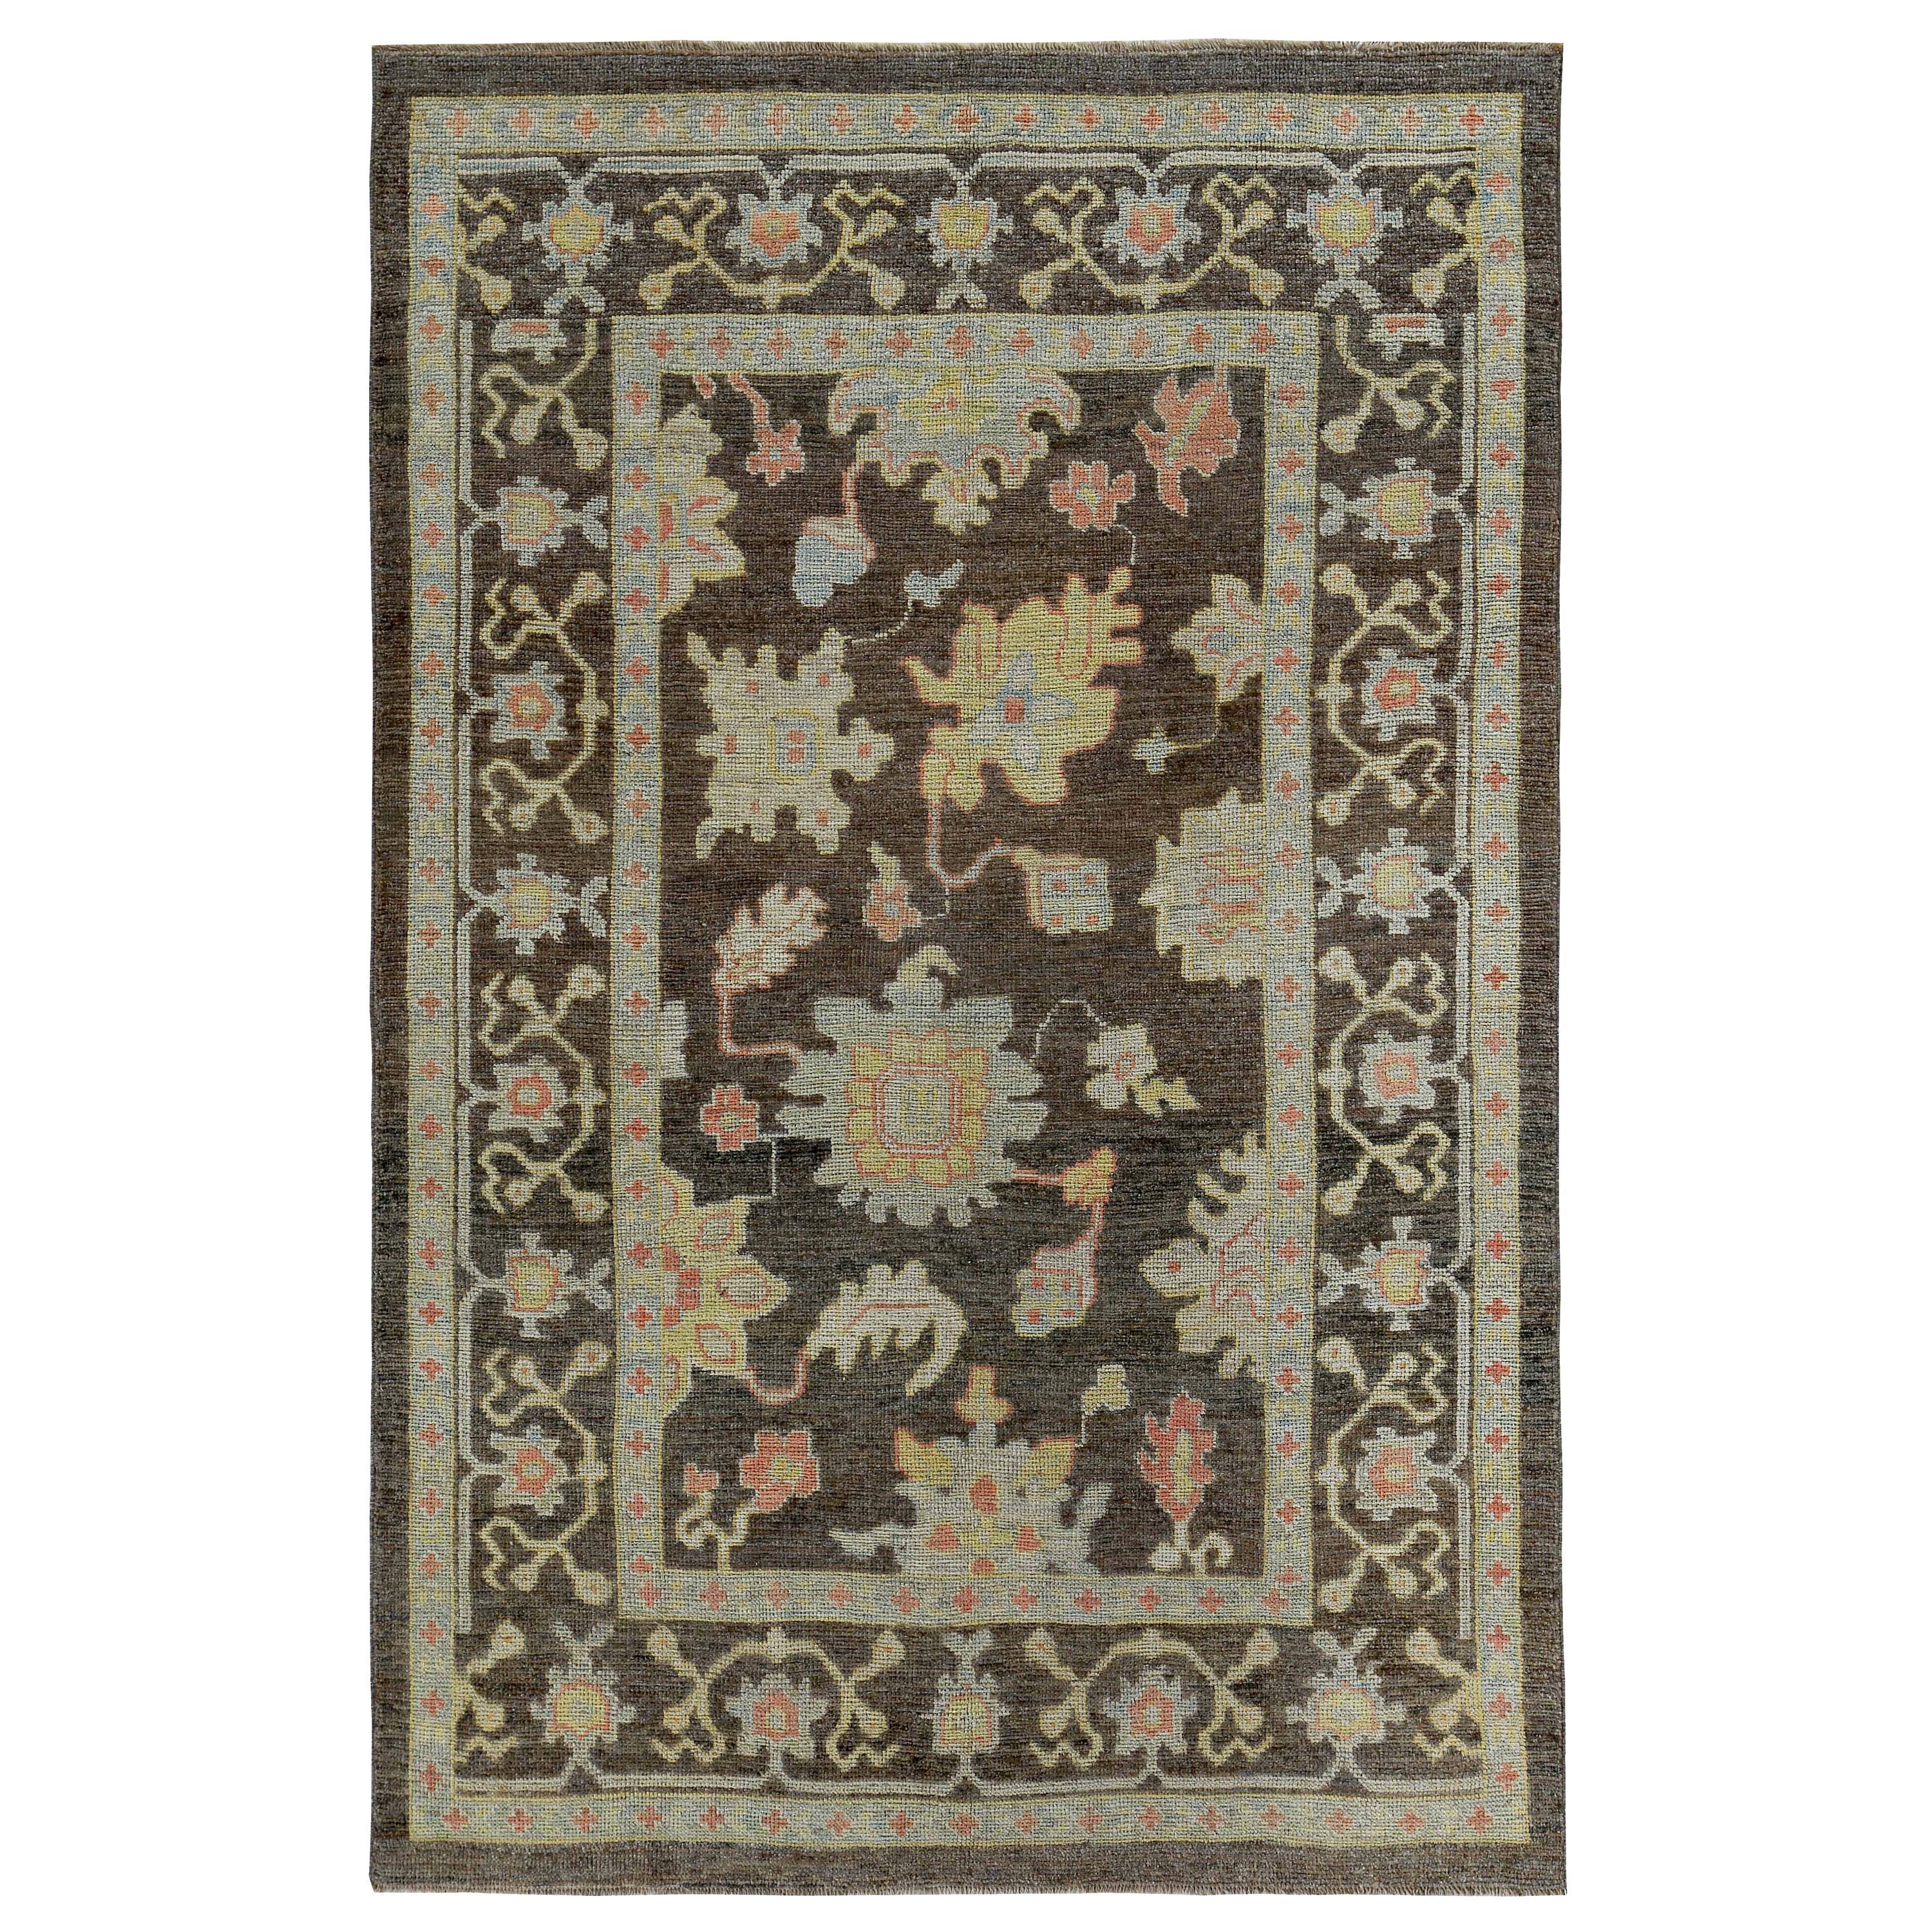 Contemporary Turkish Oushak Rug with Blue Floral Details on Brown and ...